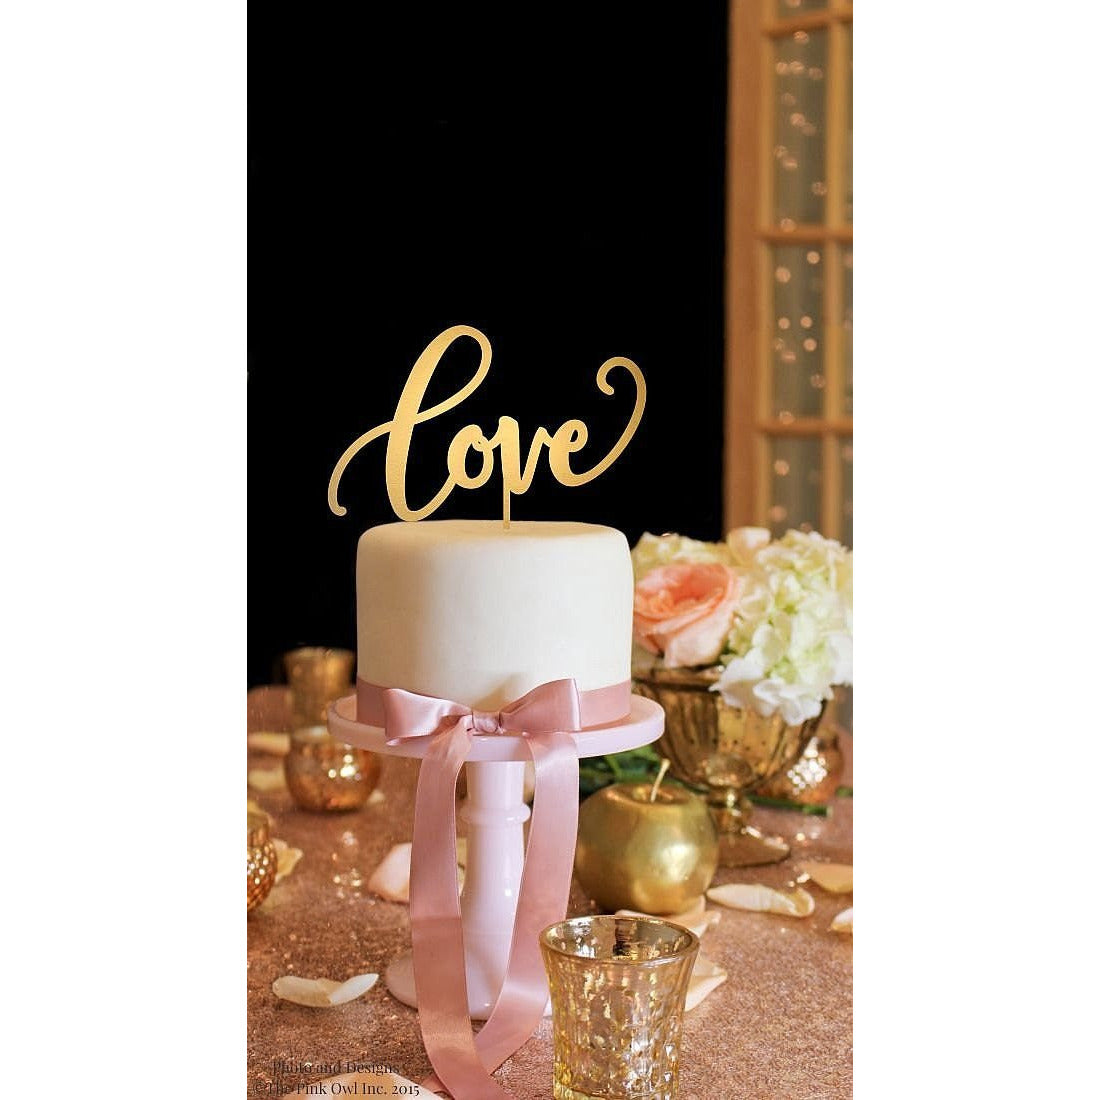 Love Wedding Cake Topper - Premium Gold Glitter - Best Cake Decoration for  Weddings, Anniversaries, Valentine, Engagement Parties, Mother’s Day & more